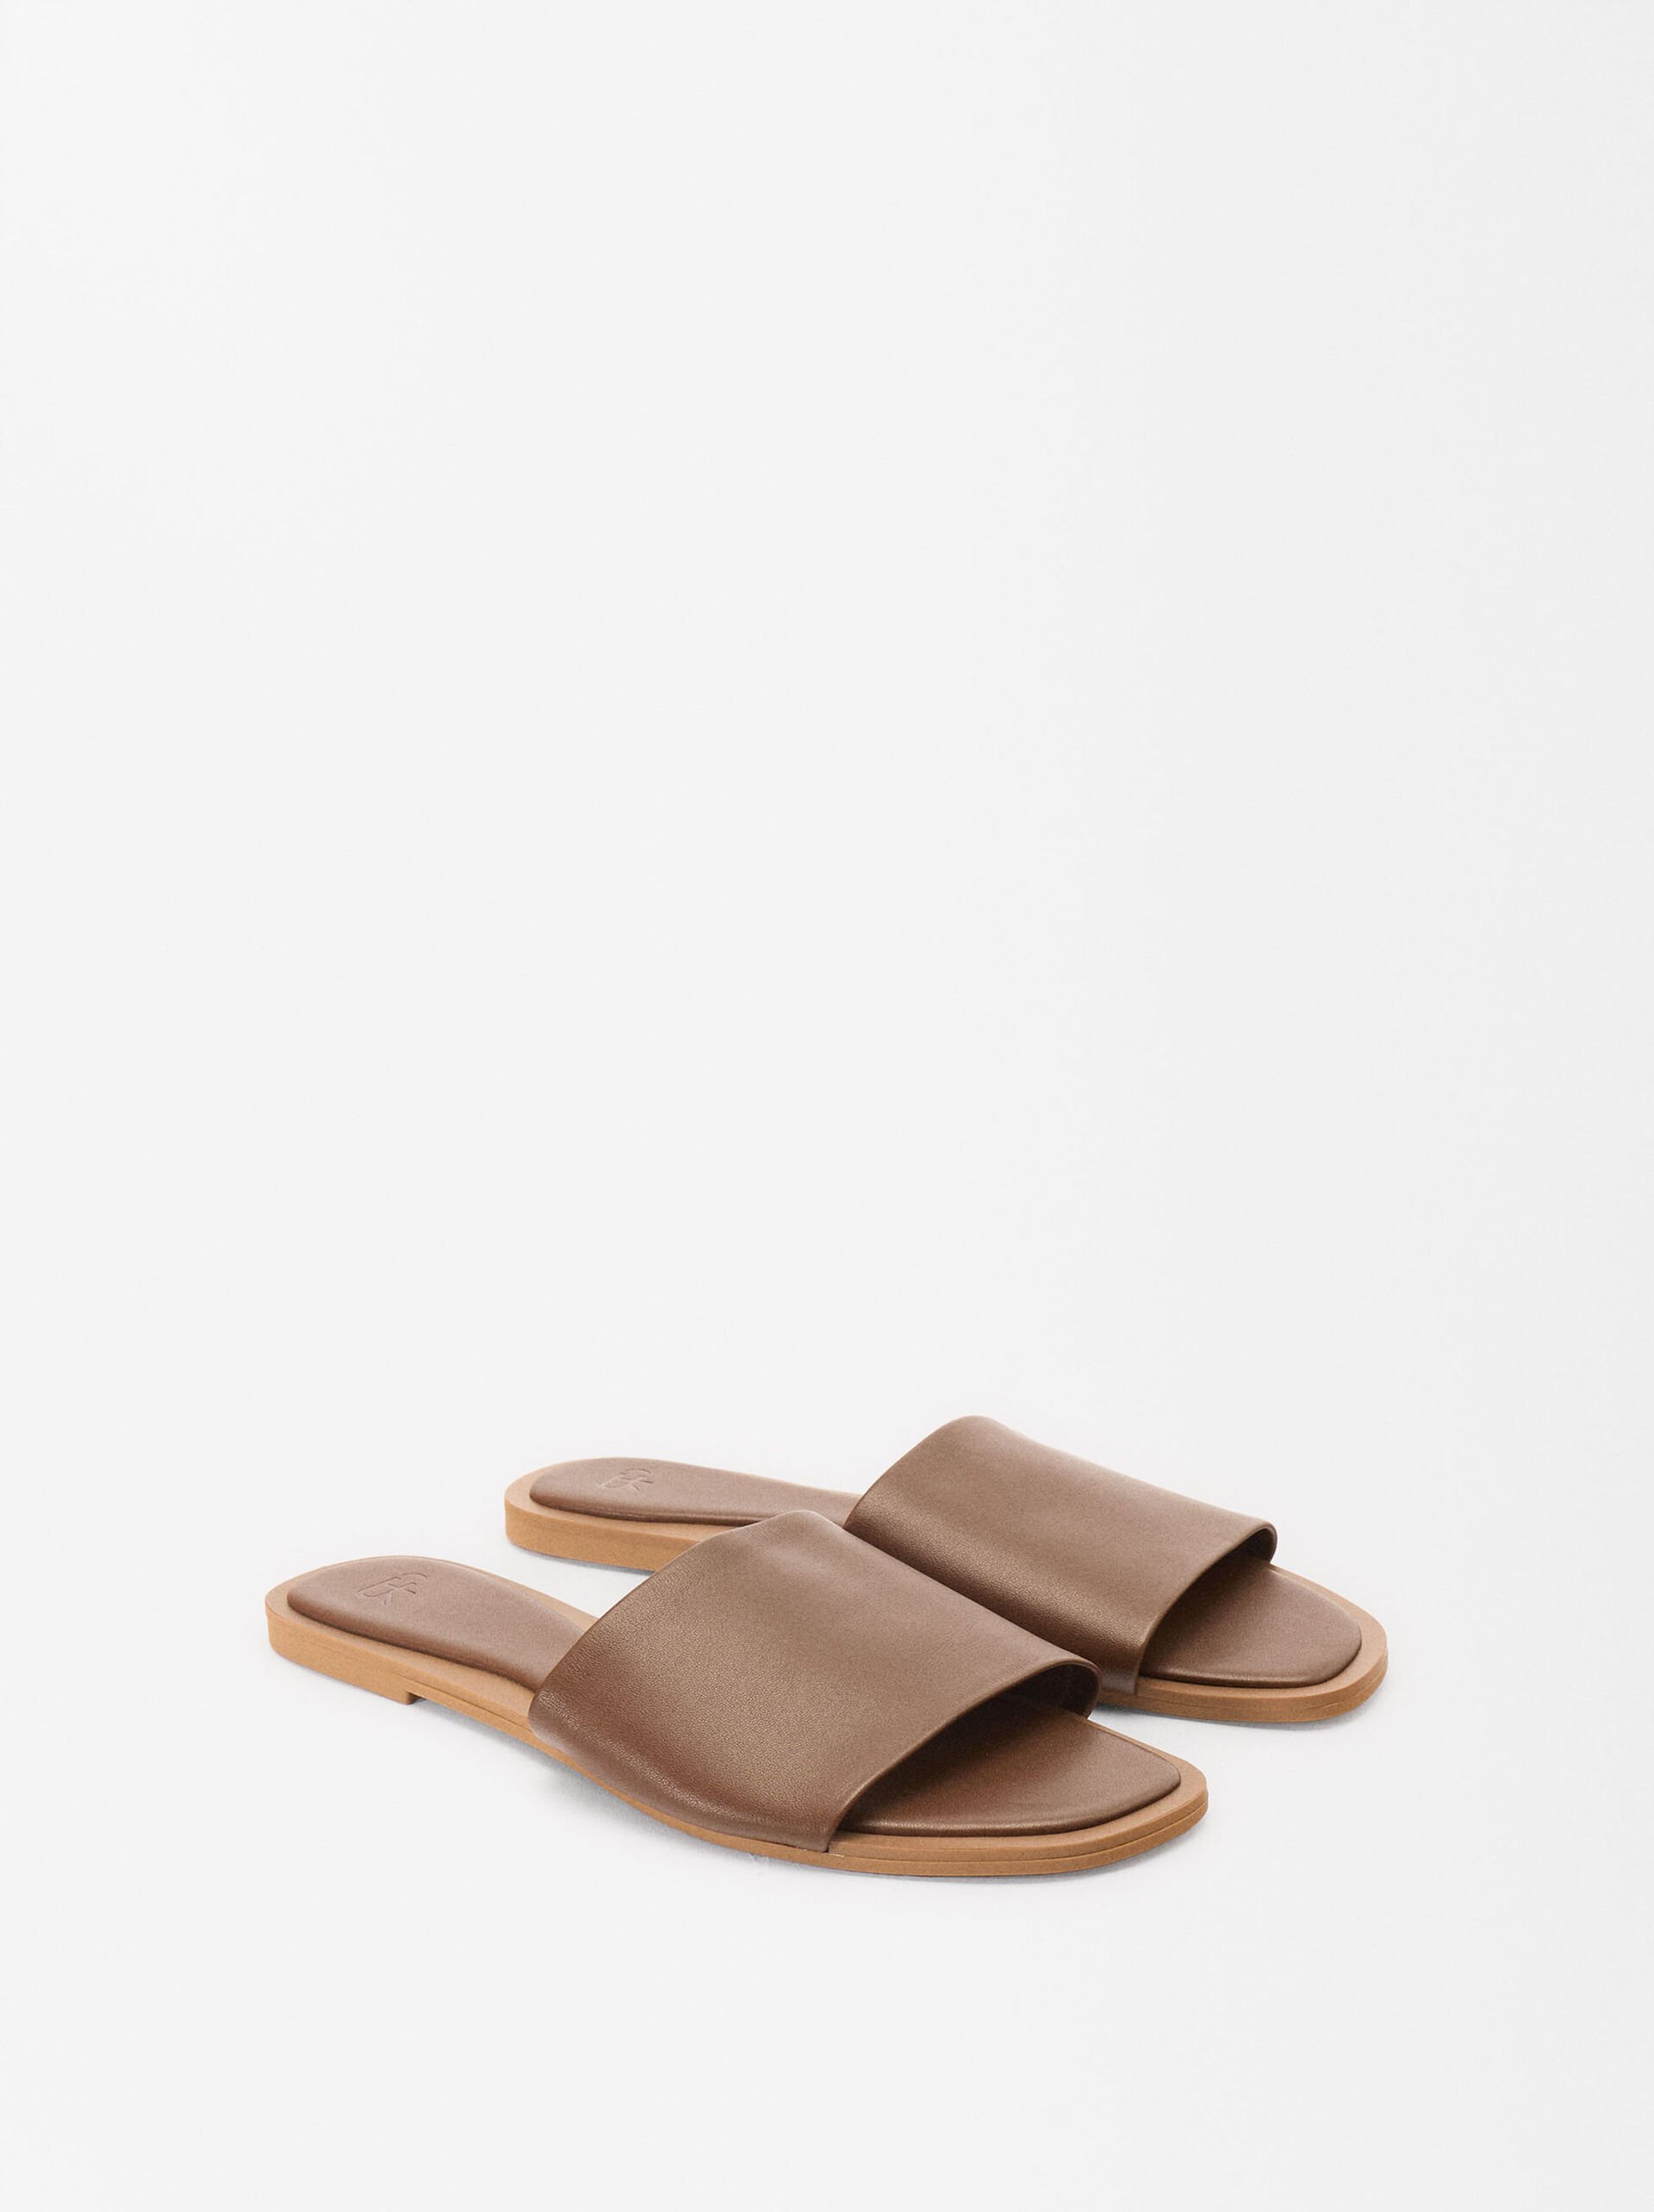 Napa Leather Sandals image number 2.0